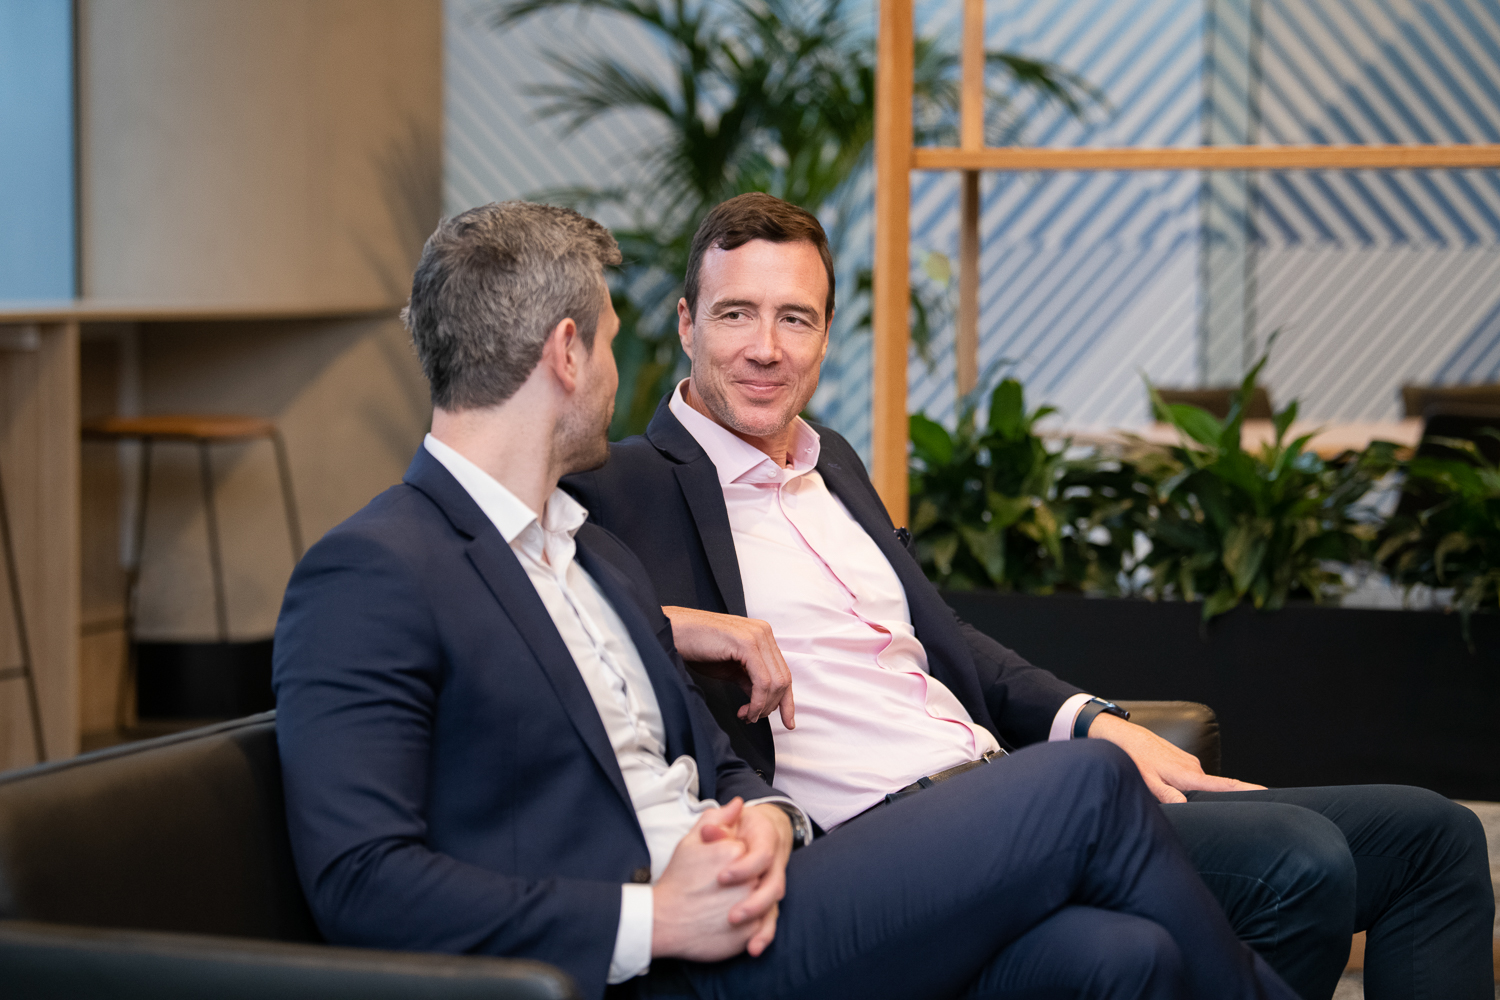 Personal branding photography of melbourne business - in-situ and working together in a collaborative way. Two business men engage in discussion while seated.